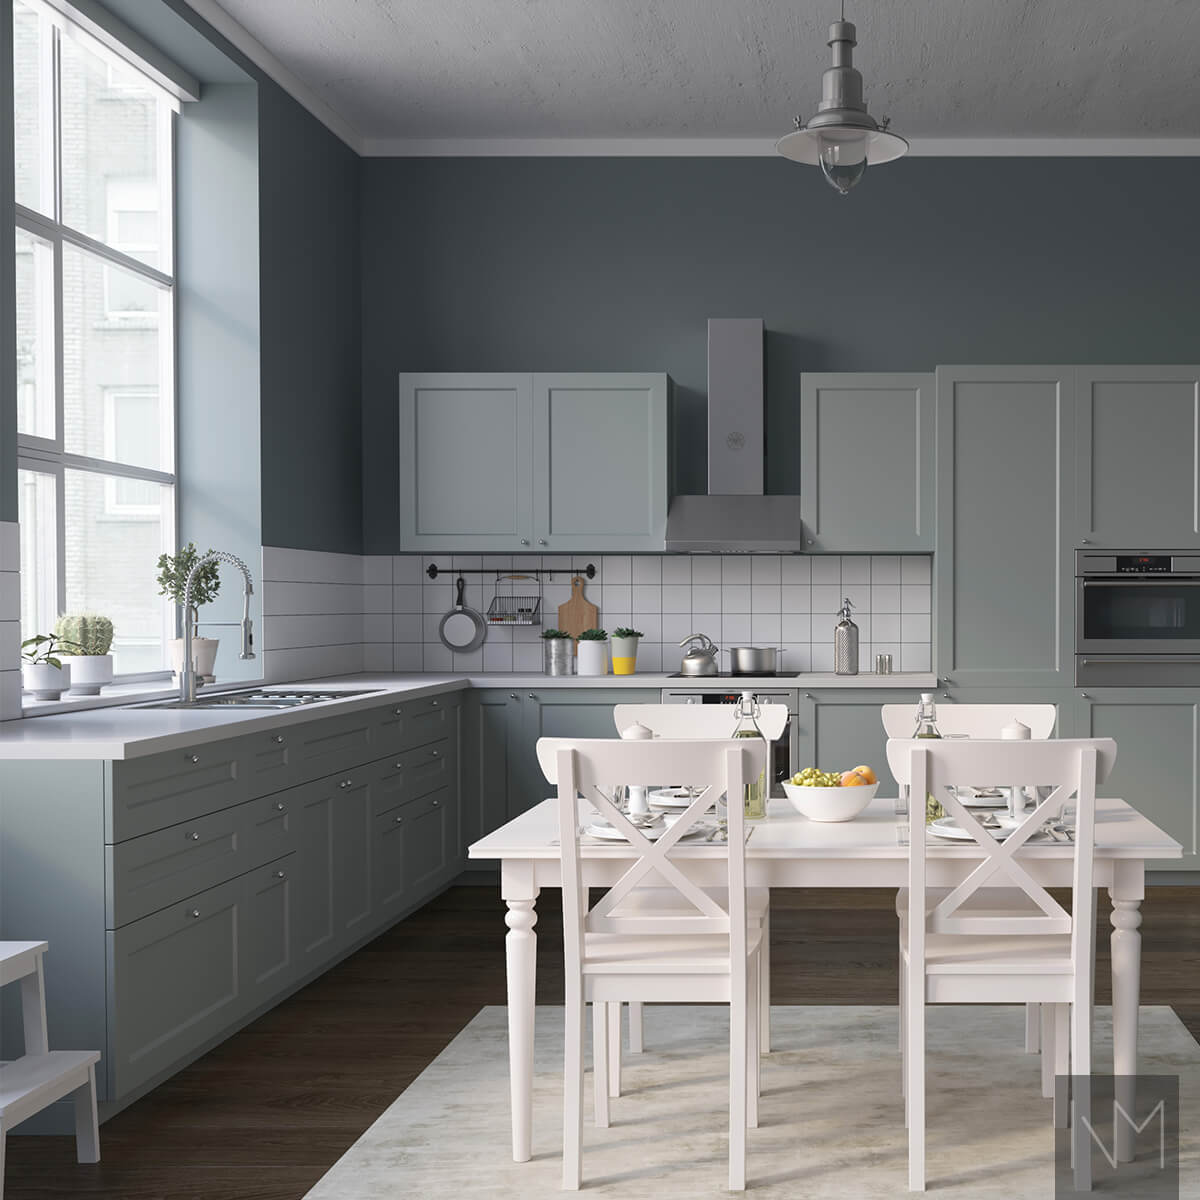 IKEA Metod or Faktum kitchen CLASSIC. Colour NCS 5105-B81G or Jotun Evening Green 6352